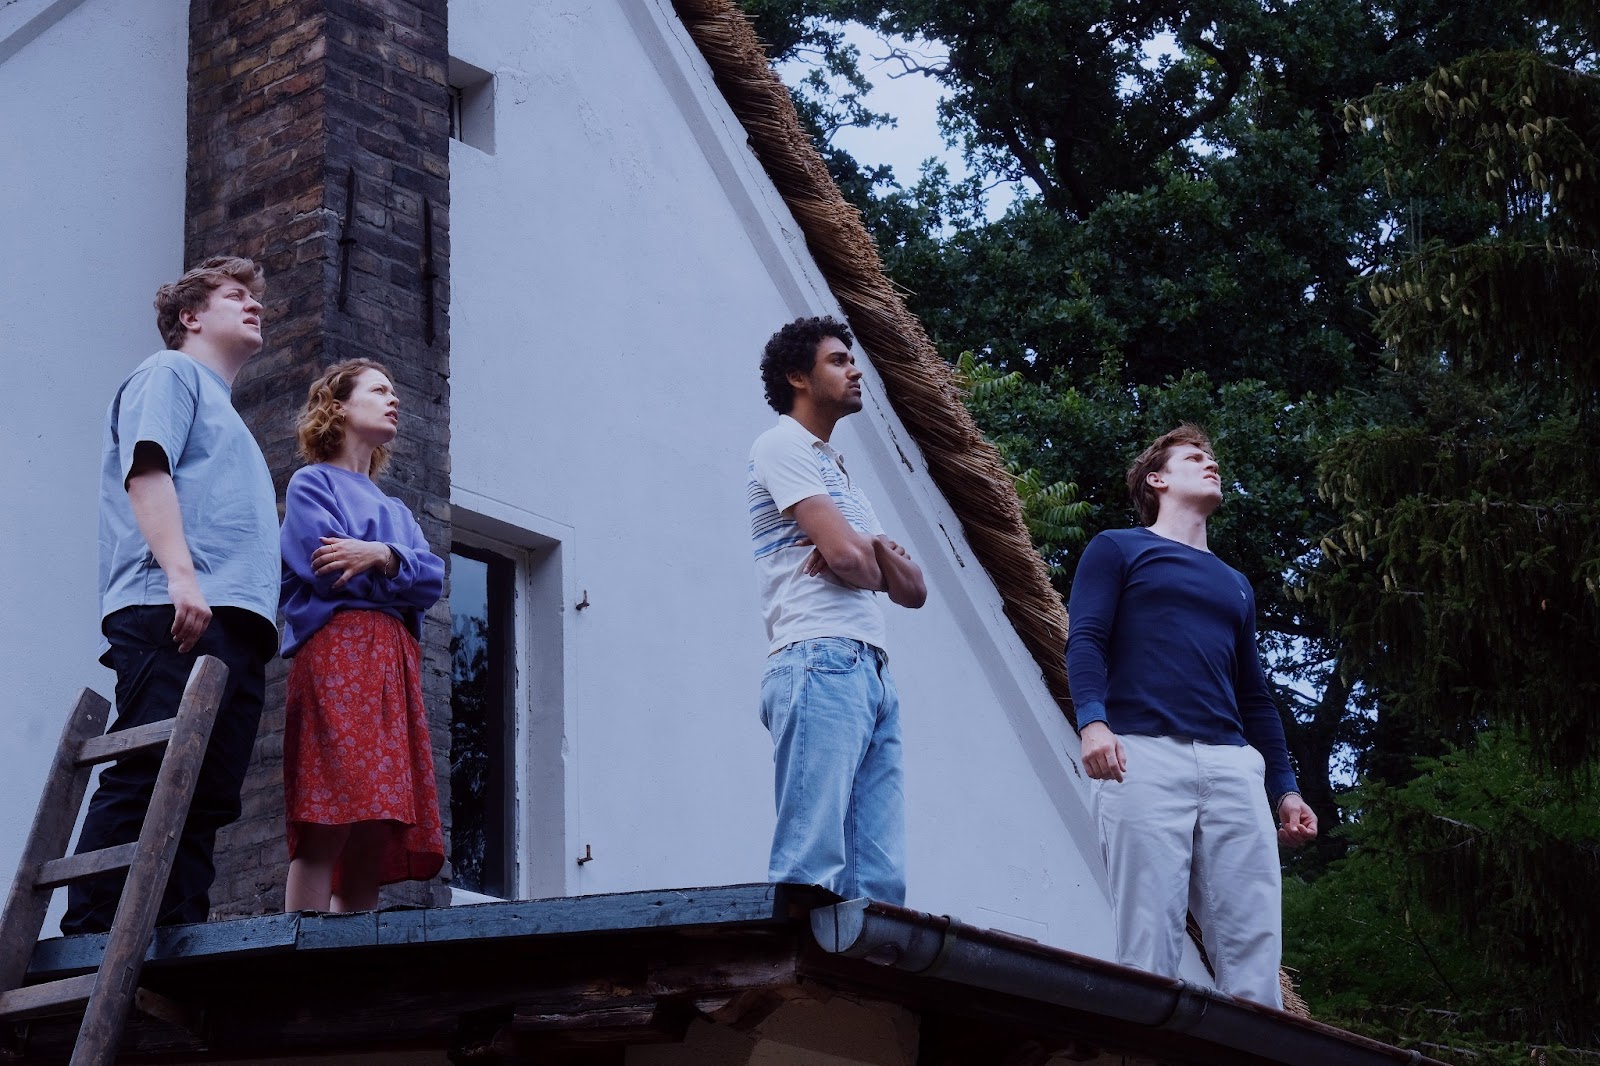 From the film Afire, four people stand on a roof of a house during the day, all looking up at the sky in the distance at something off screen.